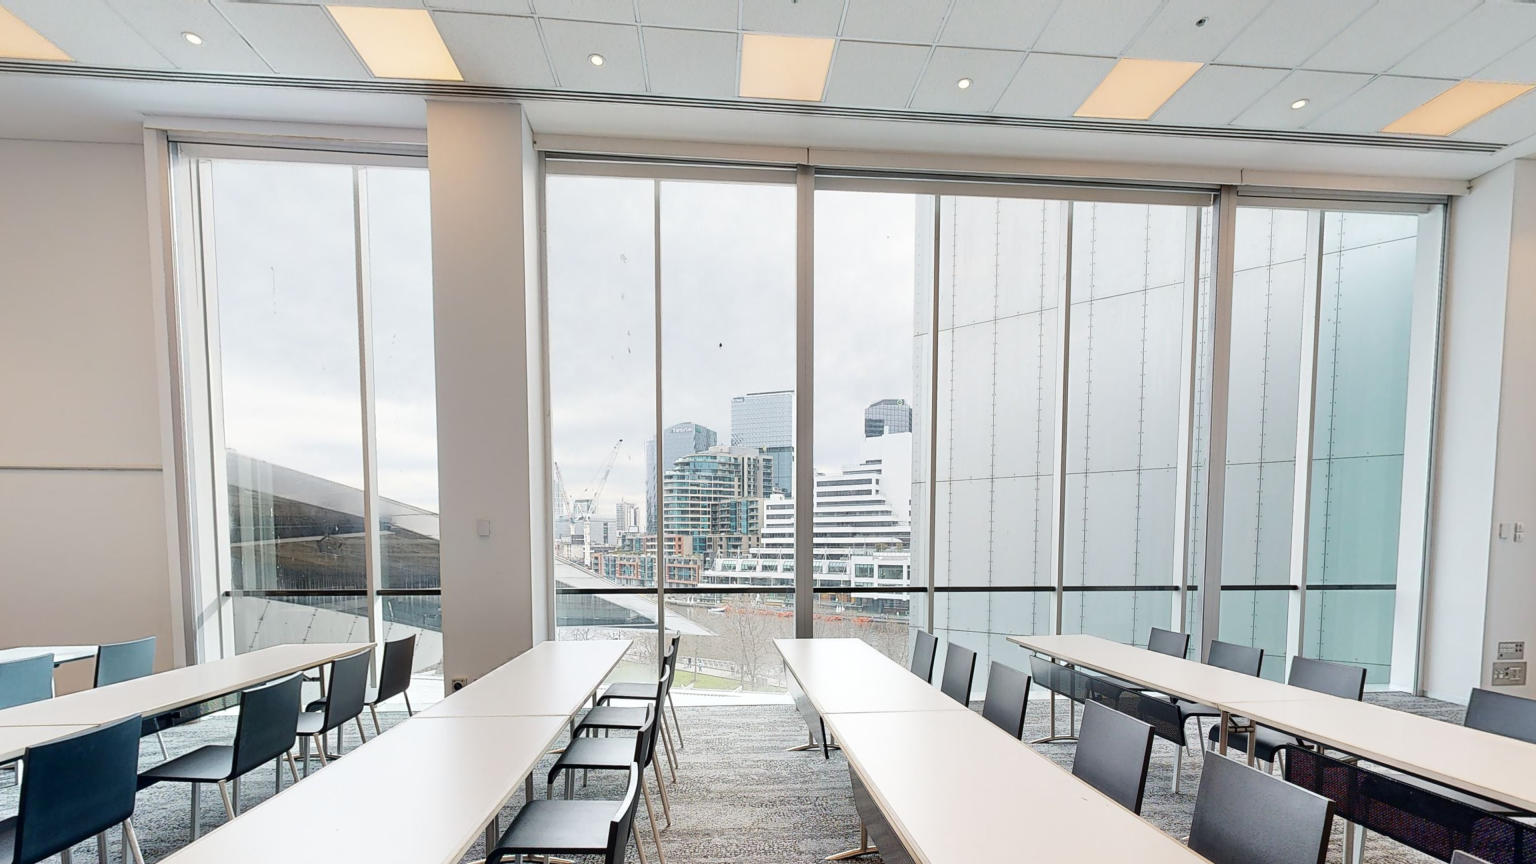 Table and chairs are set out in a classroom formation of rows facing the left side of the image. A large floor to ceiling window fills one wall of the room, which looks out to the Melbourne city. 